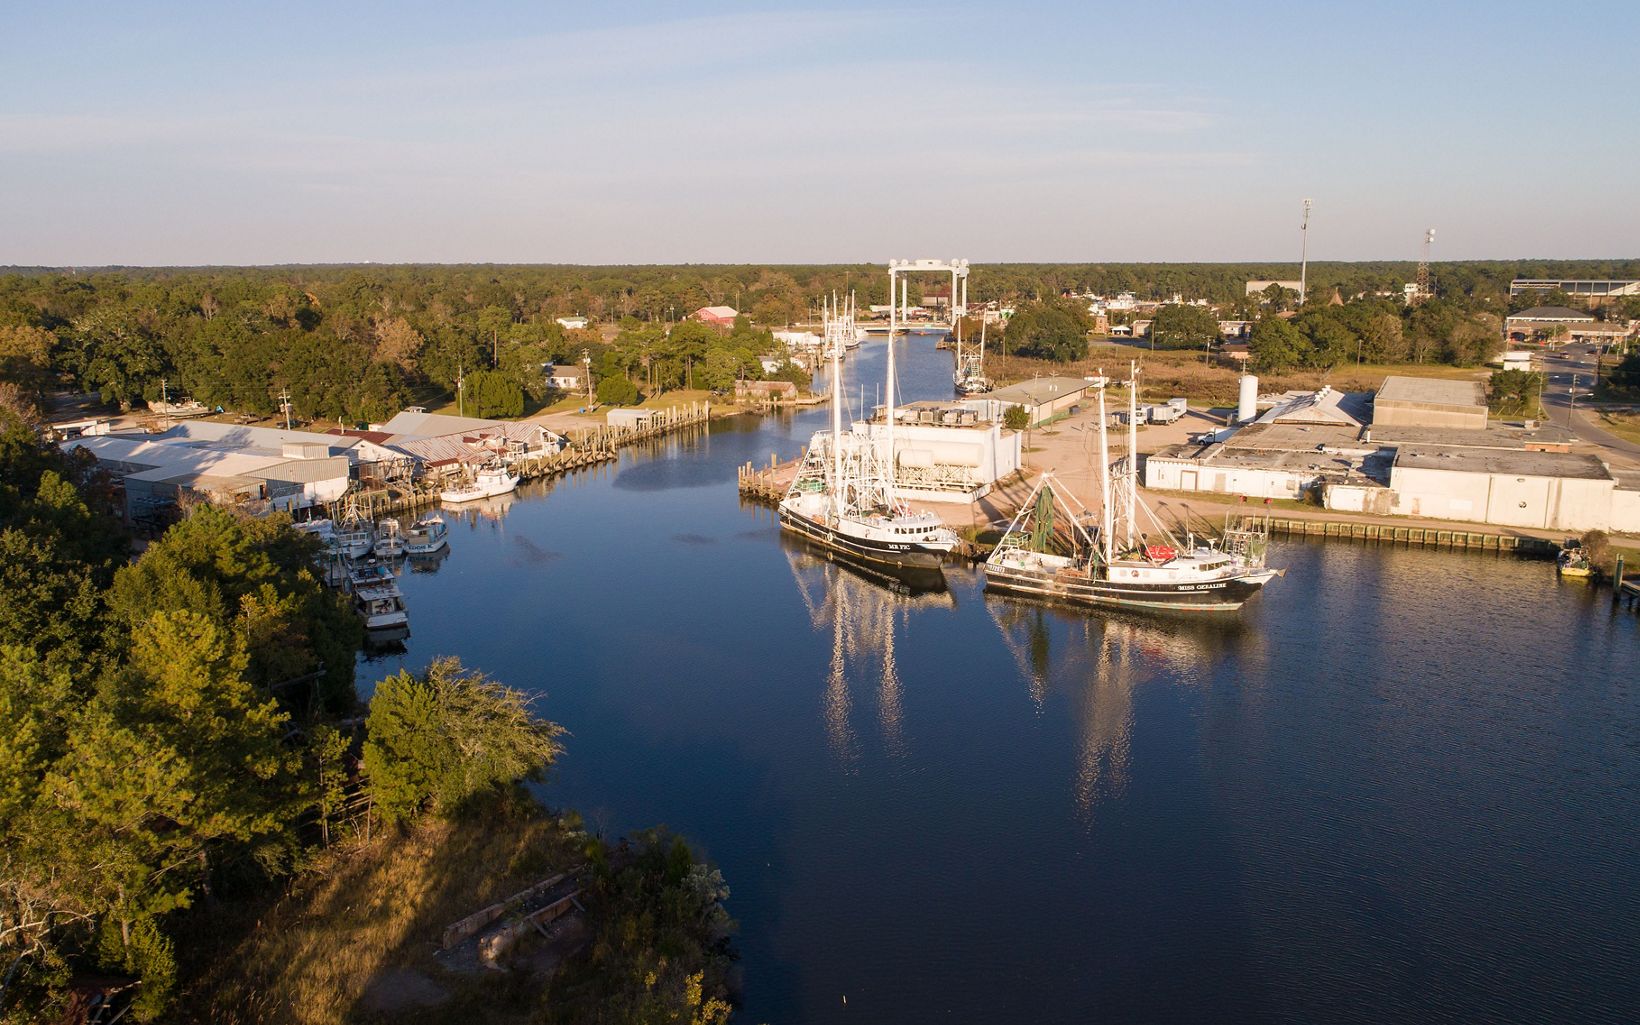 Aerial view of the port of Bayou La Batre, with two large and several small boats floating on the waters of a forest-lined channel that leads toward town.